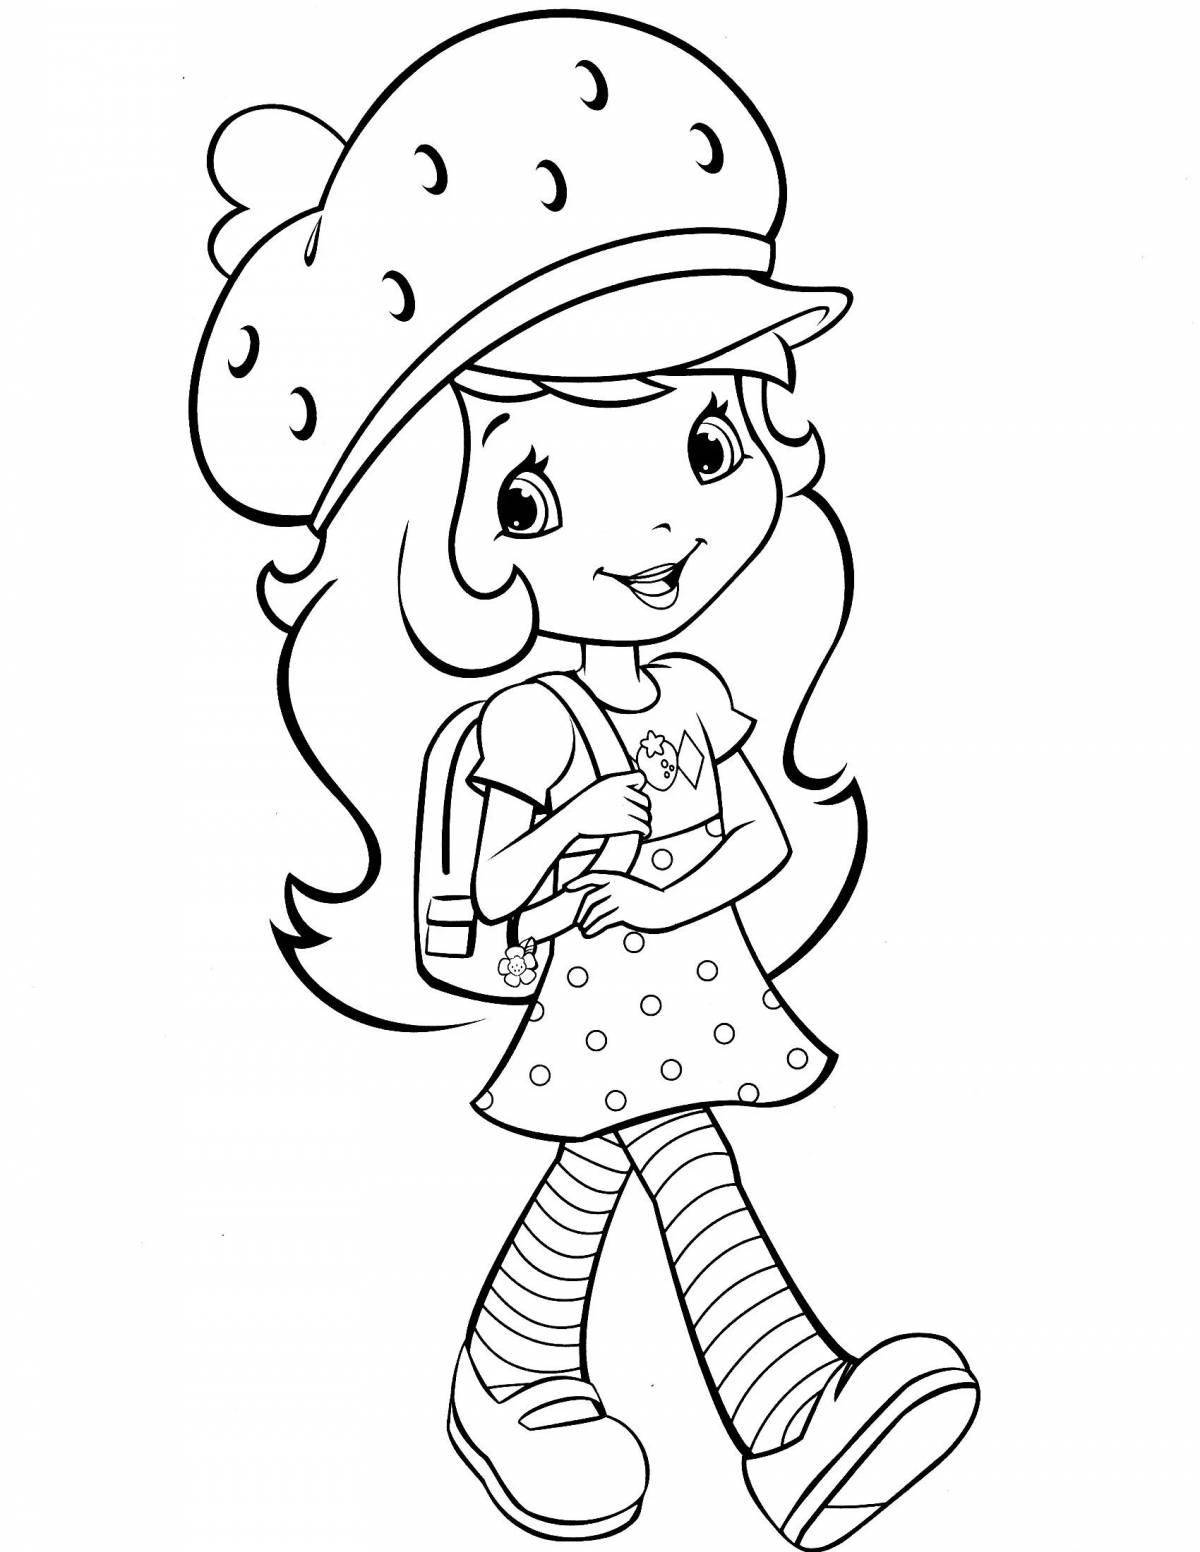 Flowering strawberry coloring page